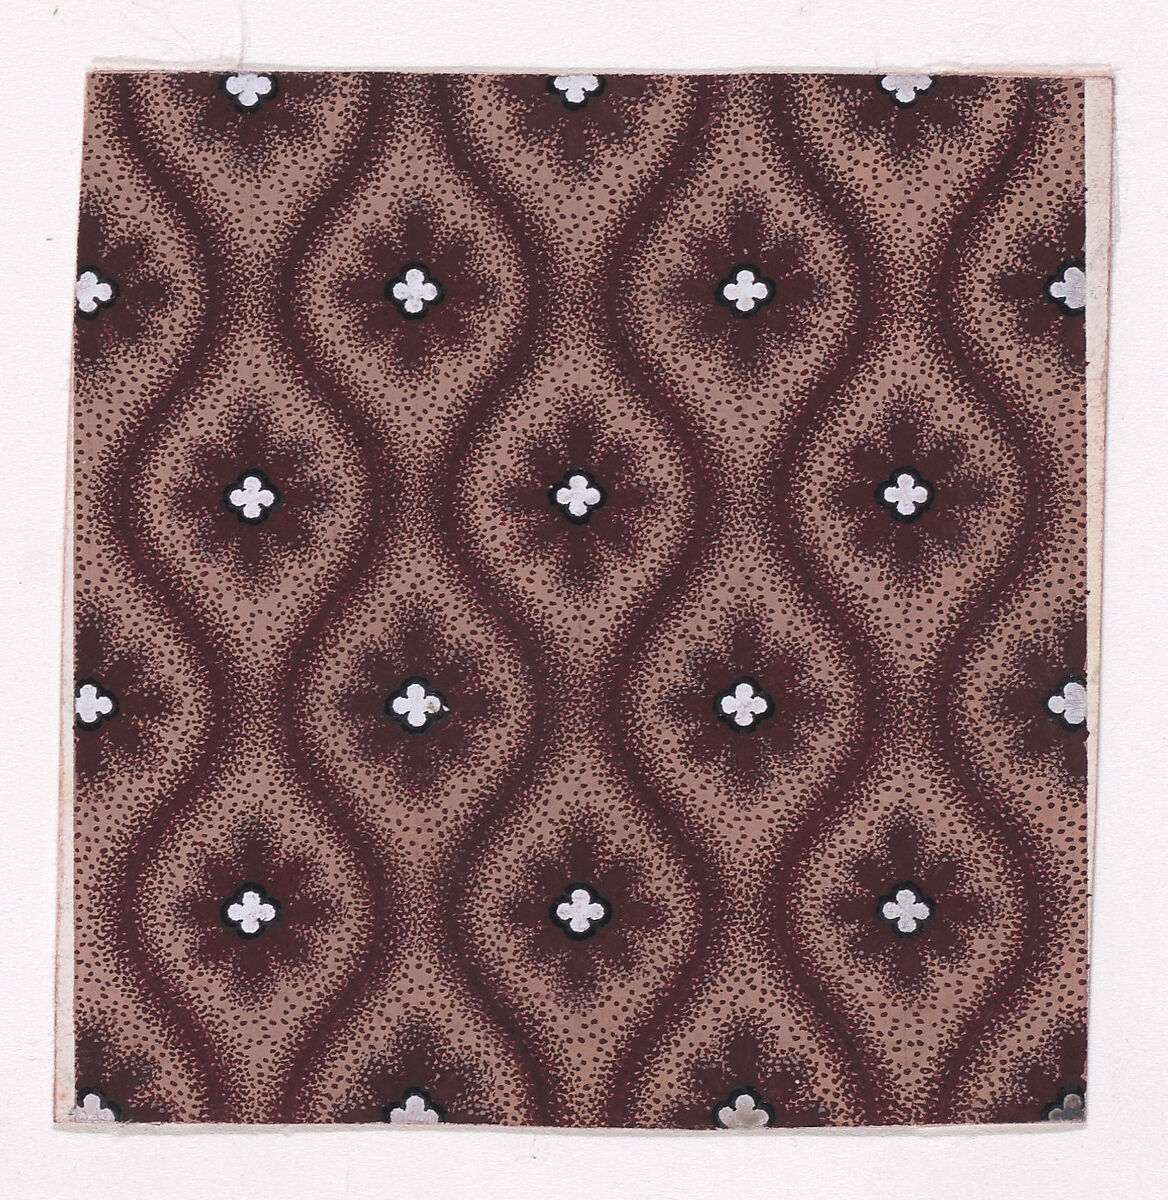 Textile Design with Alternating Vertical Rows of Rosettes with Quatrefoil Shapes in the Center Framed by Undulating Vertical Garlands, Anonymous, Alsatian, 19th century, Gouache 